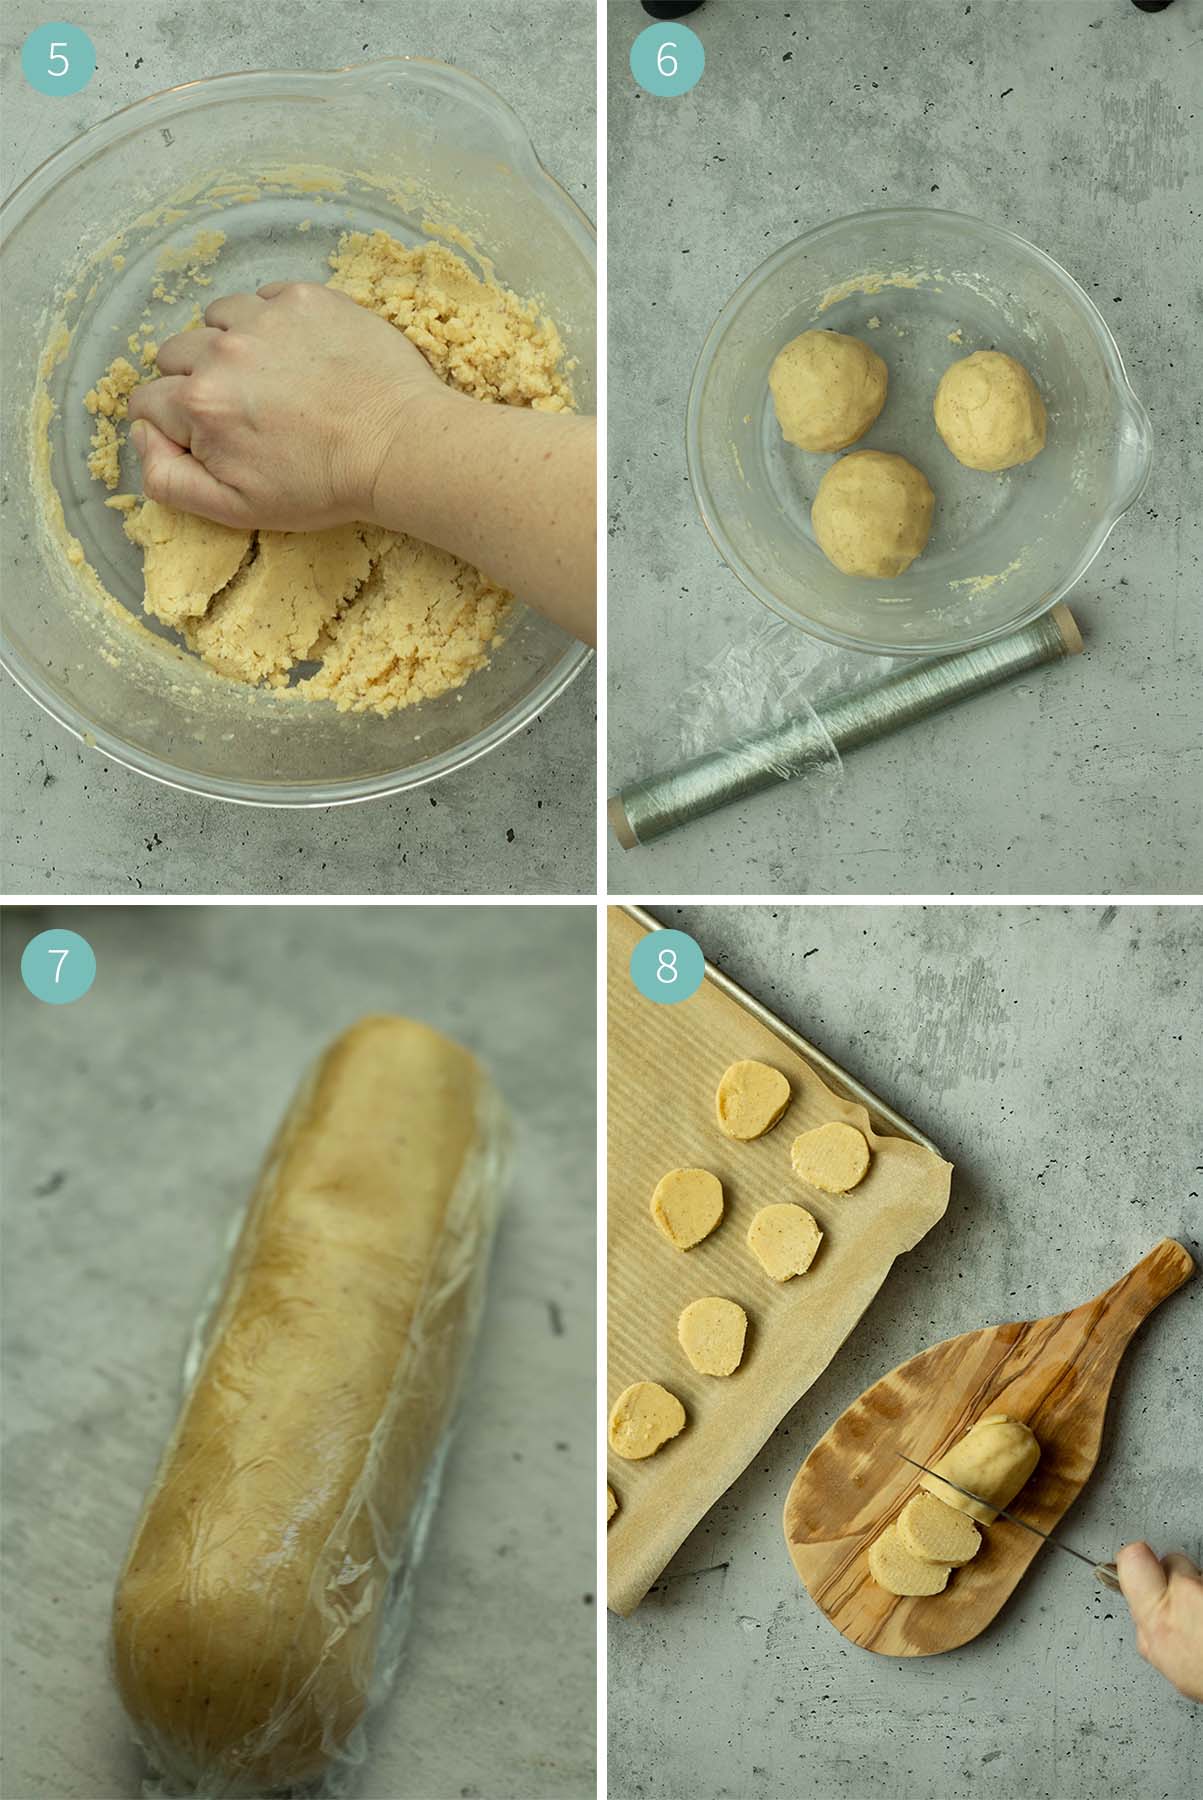 How to make German heidesand cookies - Steps 5 to 8 in pictures